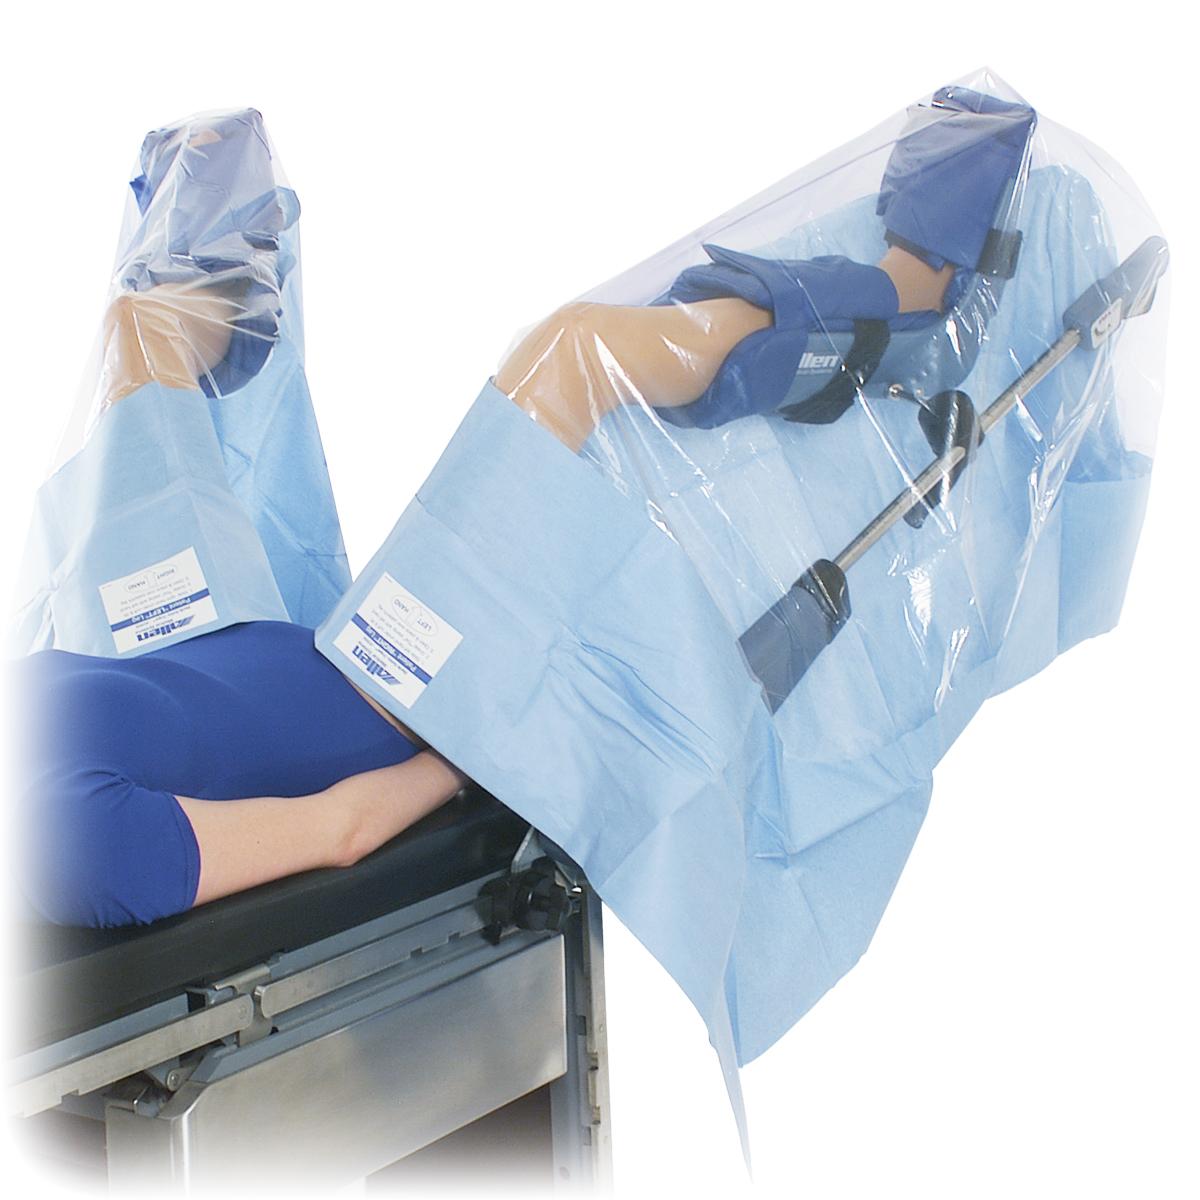 Safety Drapes in use with patient